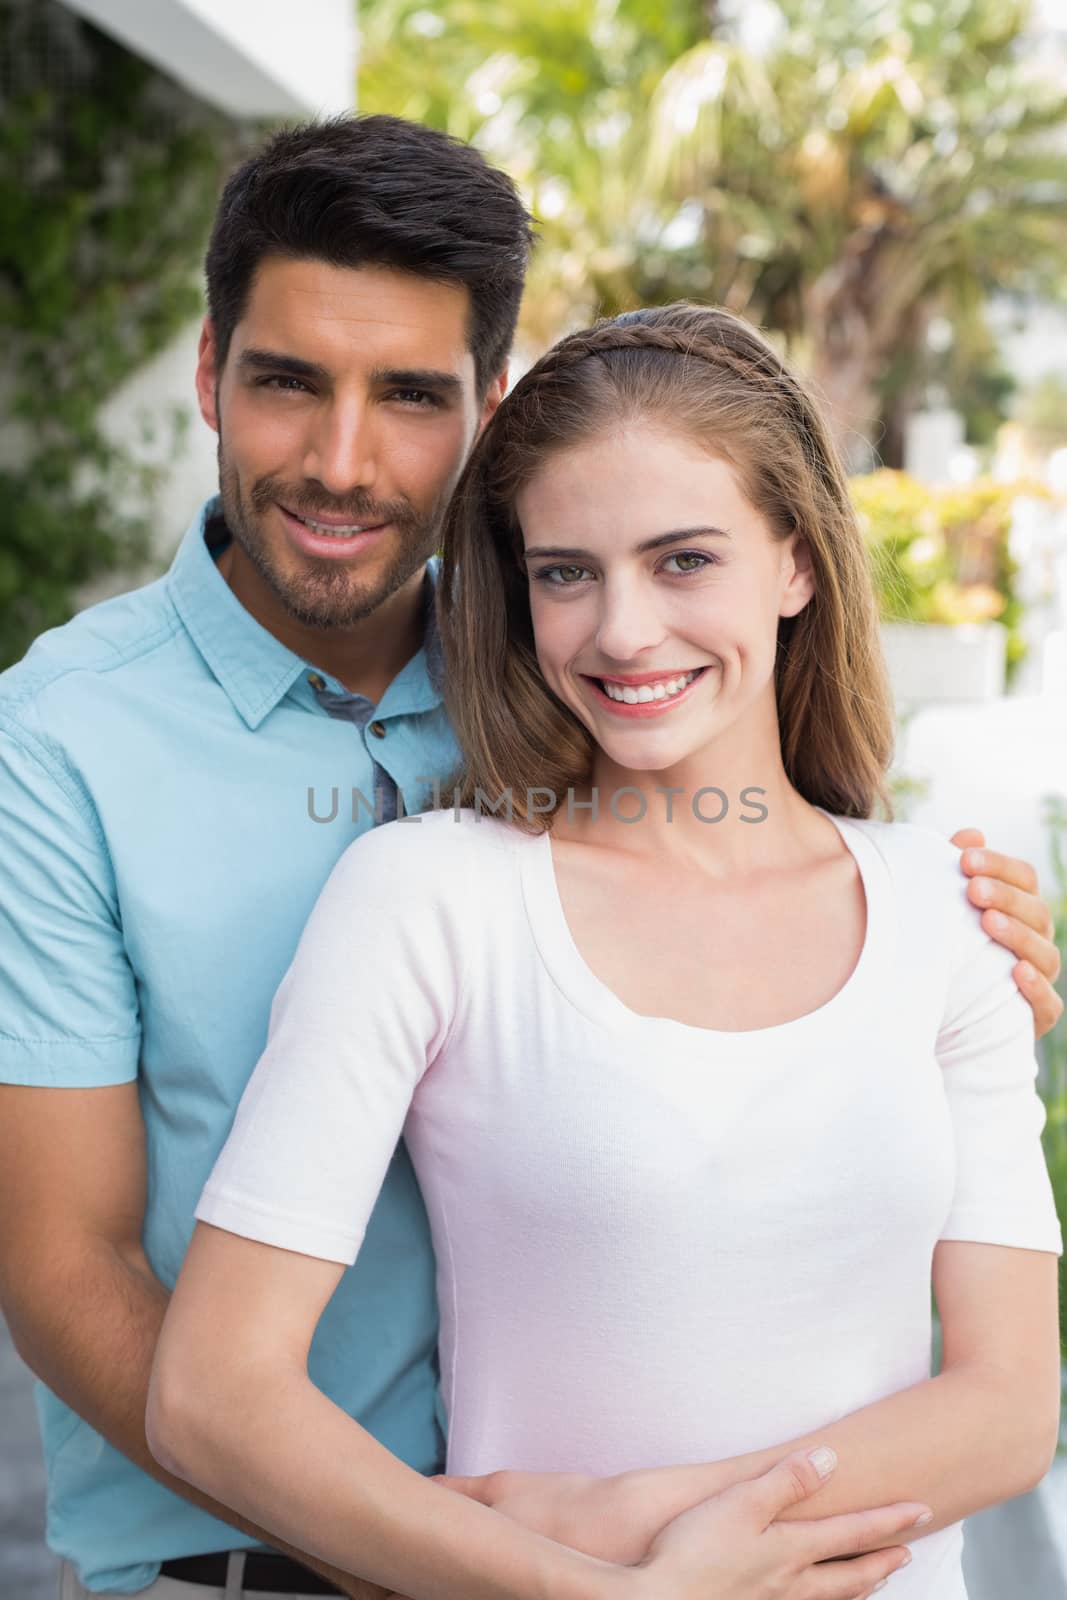 Loving man embracing woman from behind outdoors by Wavebreakmedia